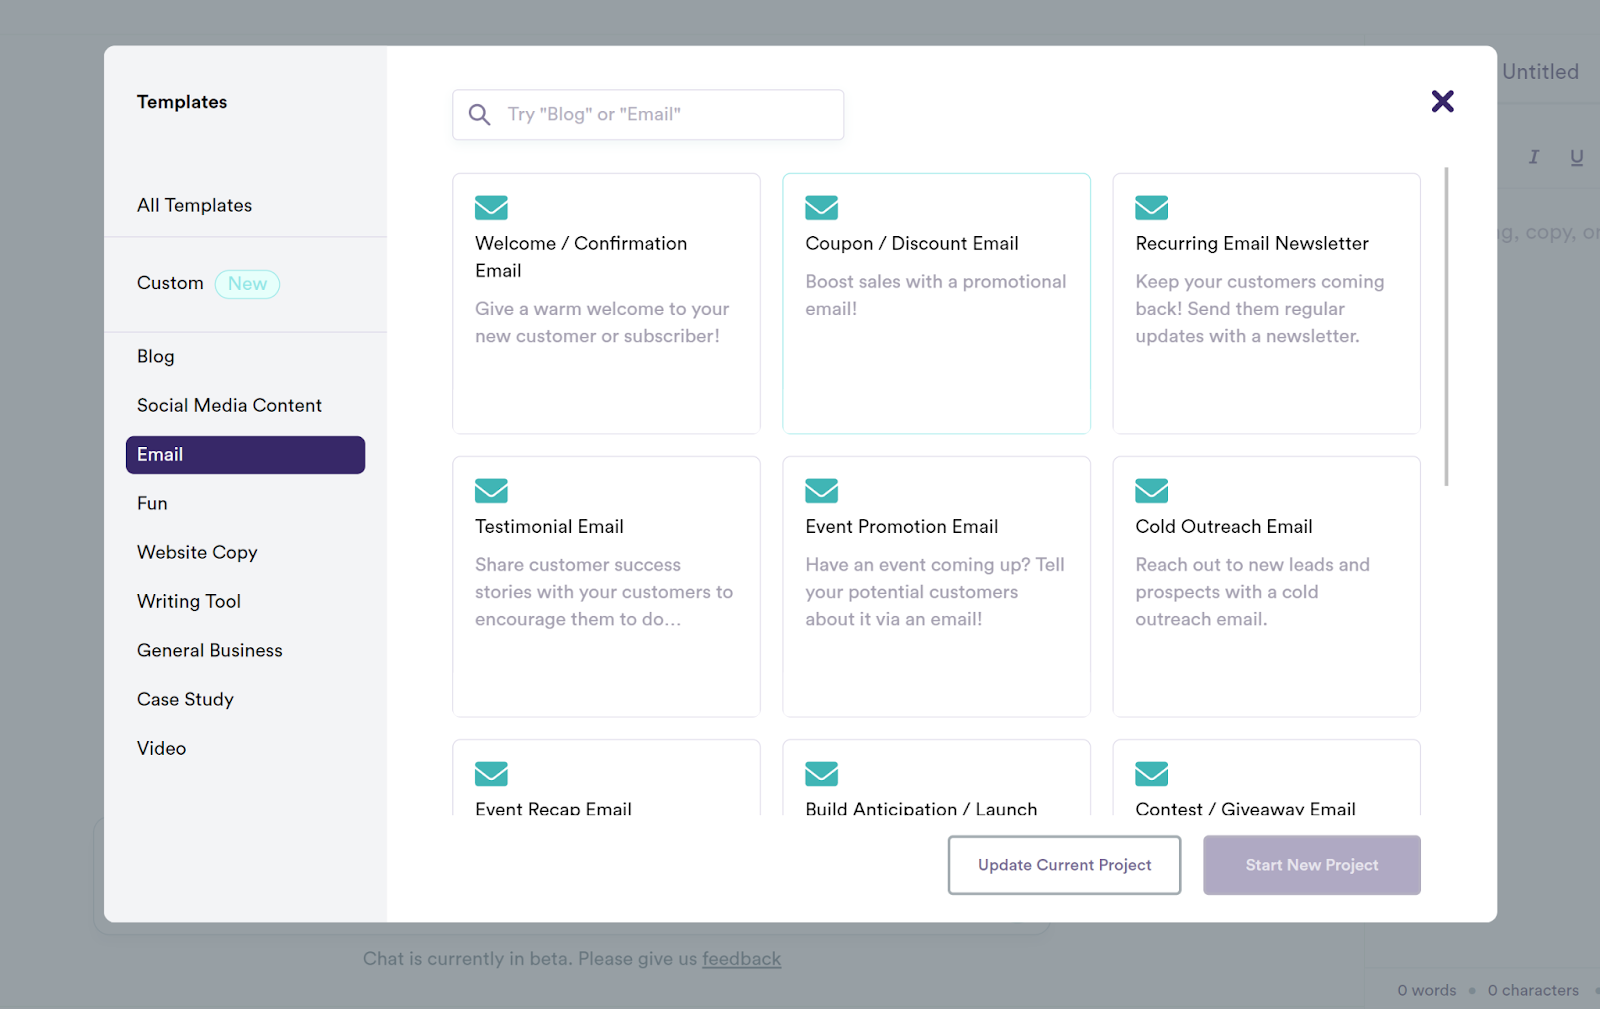 A screenshot featuring email templates from Copy.ai